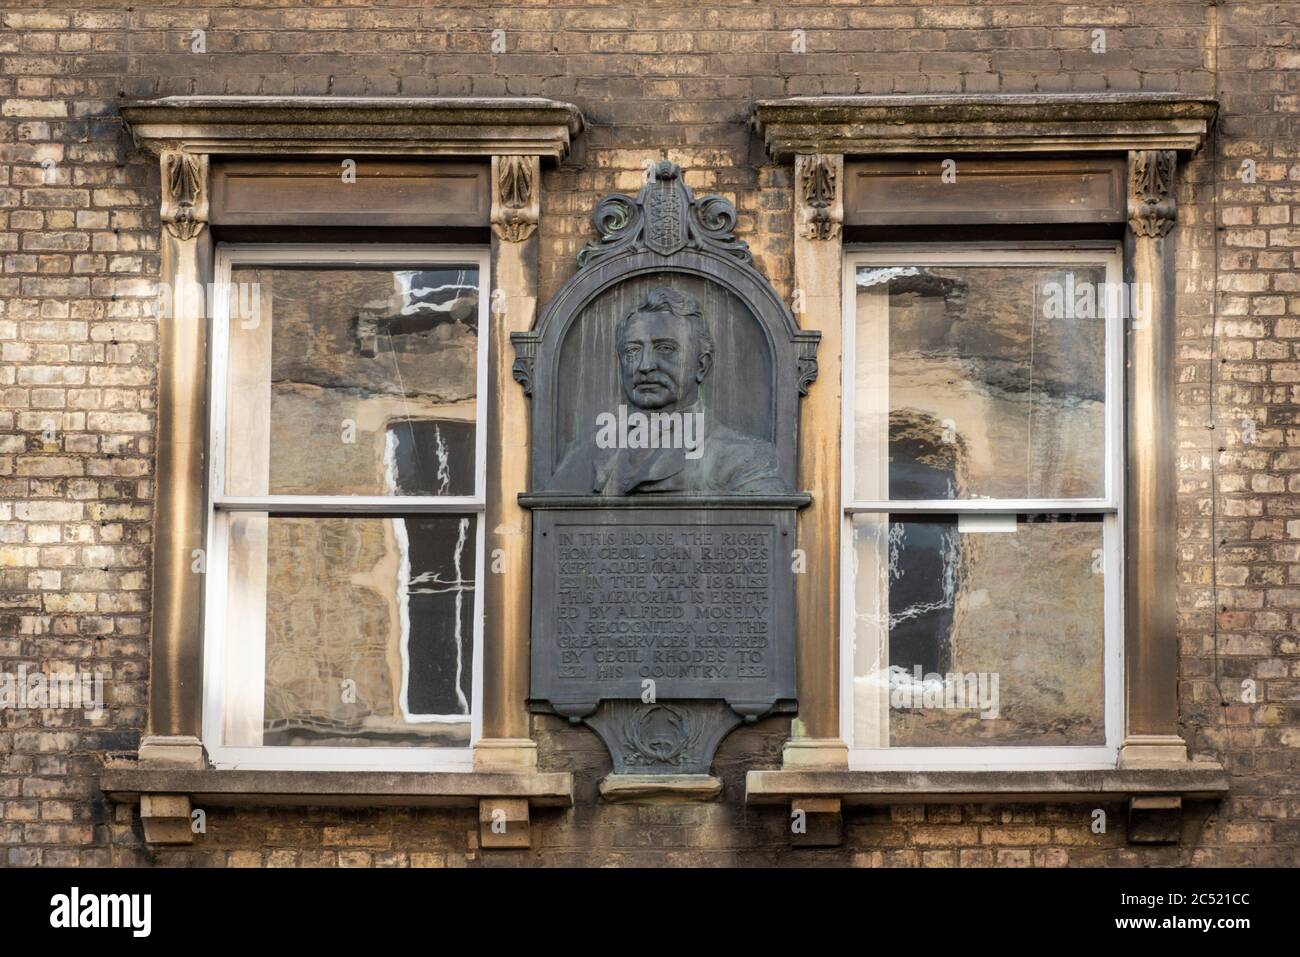 Plaque on the wall of 6 King Edward Street, Oxford, commemorating the time Cecil Rhodes lived there as a student in 1881. The plaque is round the corner from the statue of Rhodes which has been the focus of protests by the Black Lives Matter and Rhodes Must fall demonstrations of 2020, in protest at his profile as a colonialist. Stock Photo